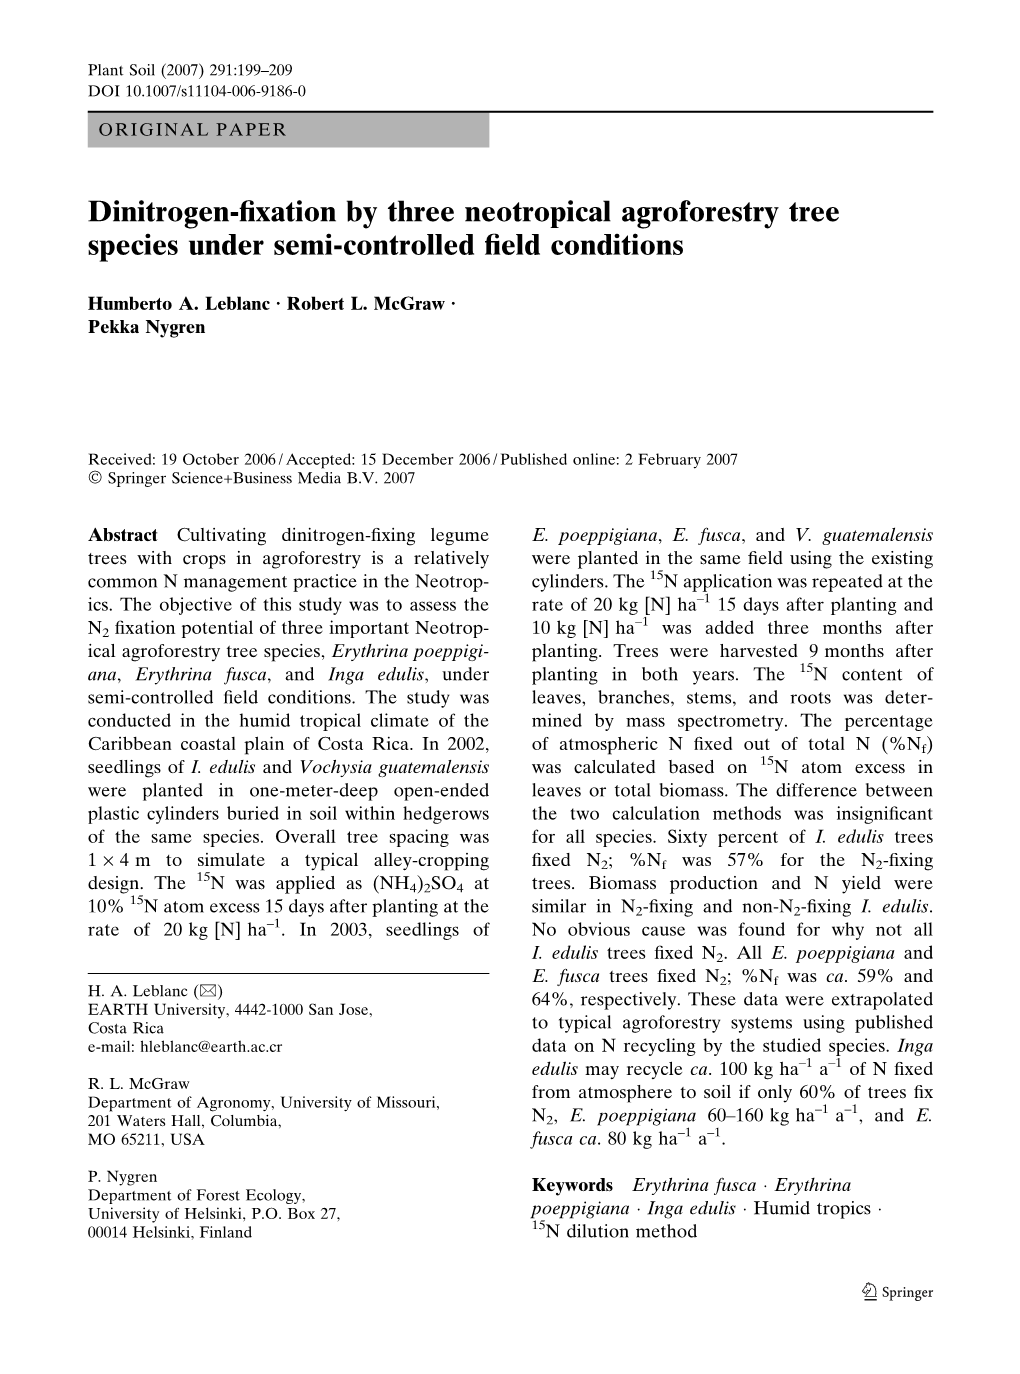 Dinitrogen-Fixation by Three Neotropical Agroforestry Tree Species Under Semi-Controlled Field Conditions